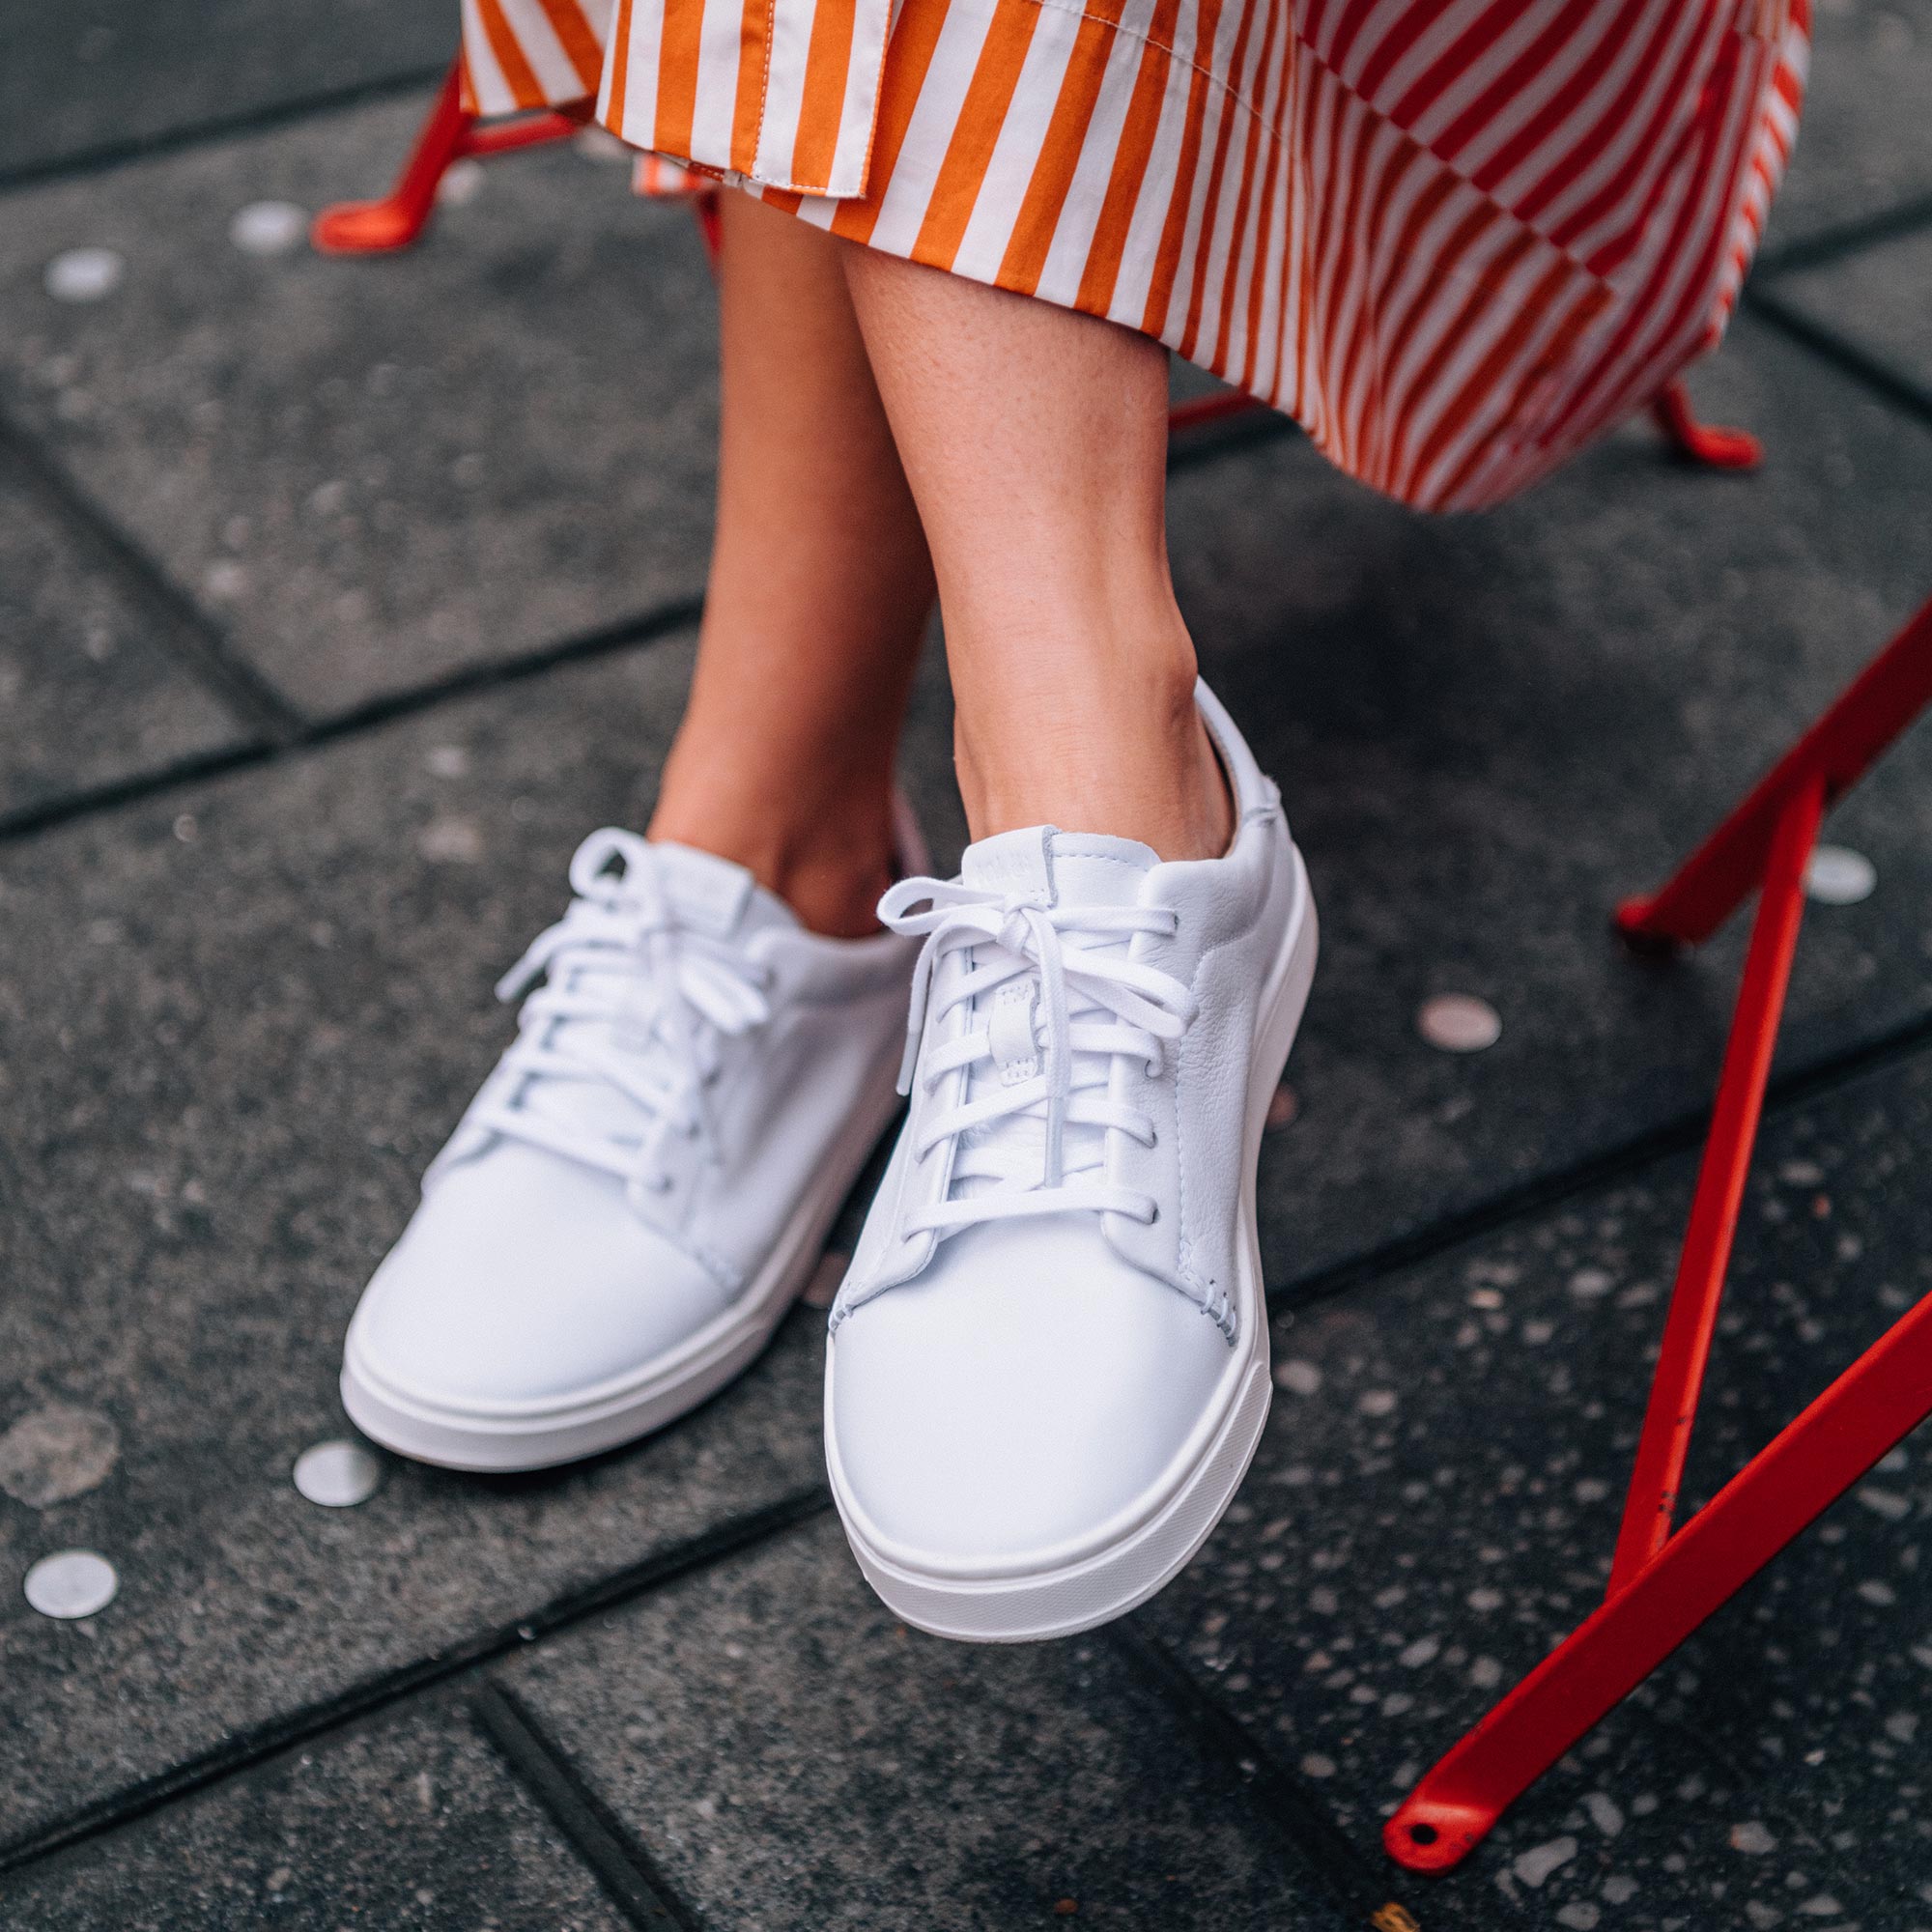 White Stoned Patterned Sneakers – Street Style Stalk